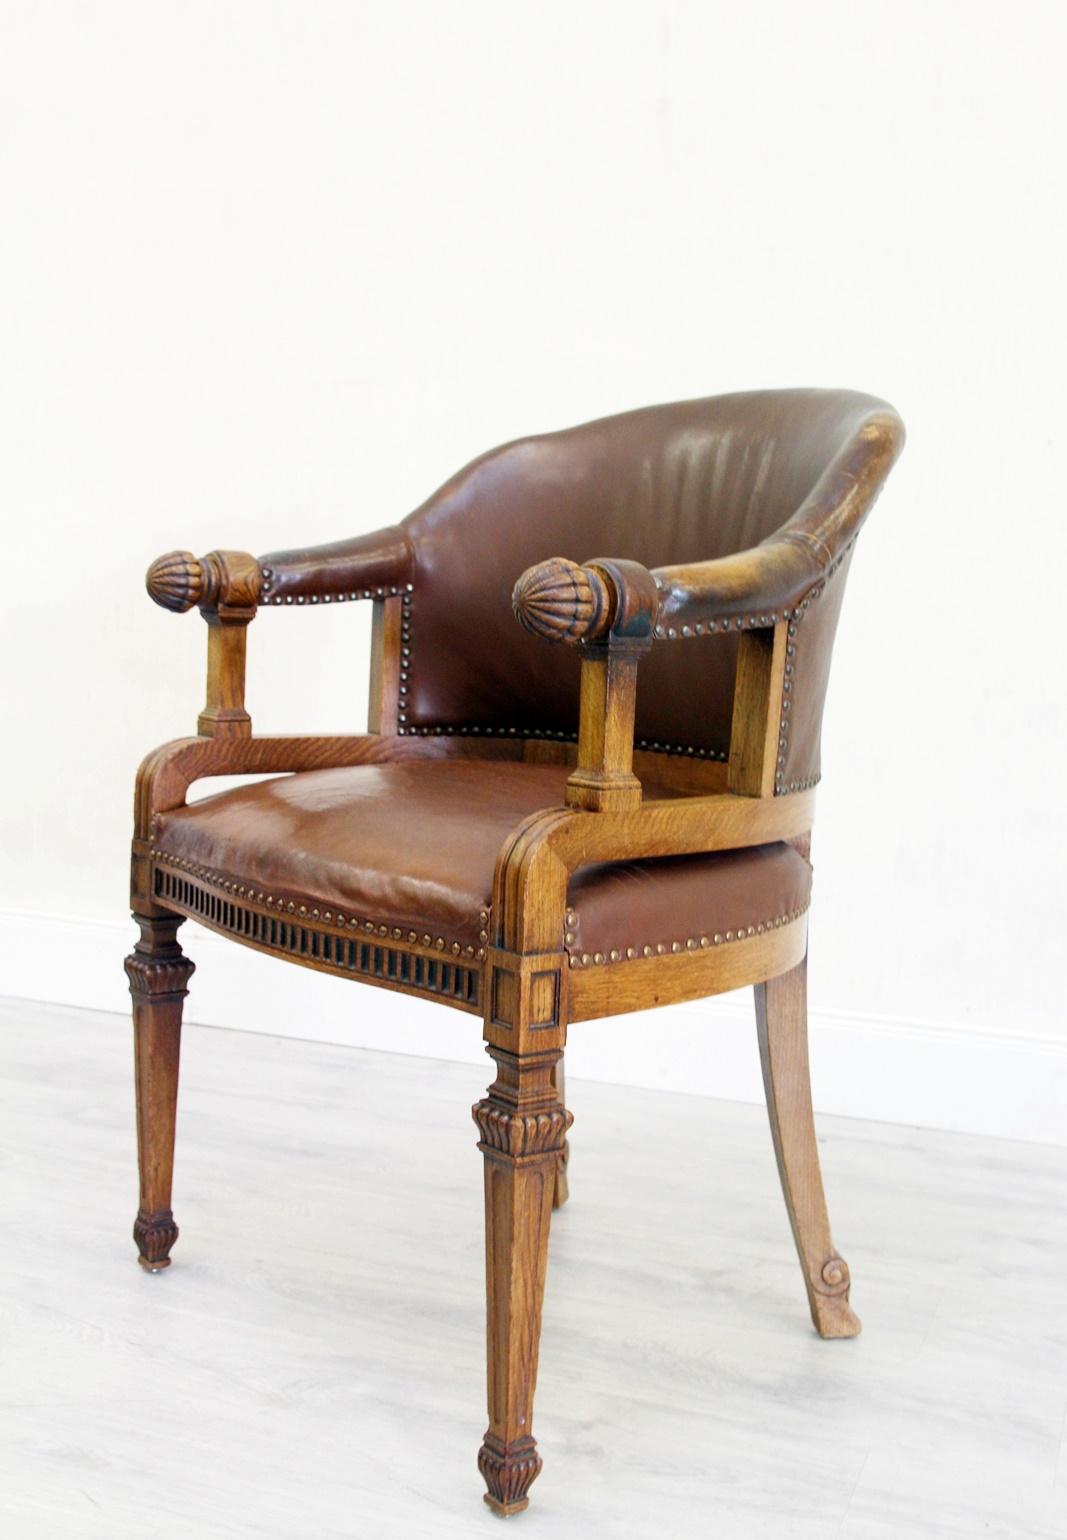 British Colonial Office Chair Antique Early Days Armchair Office Armchair Leather Vintage Chair For Sale